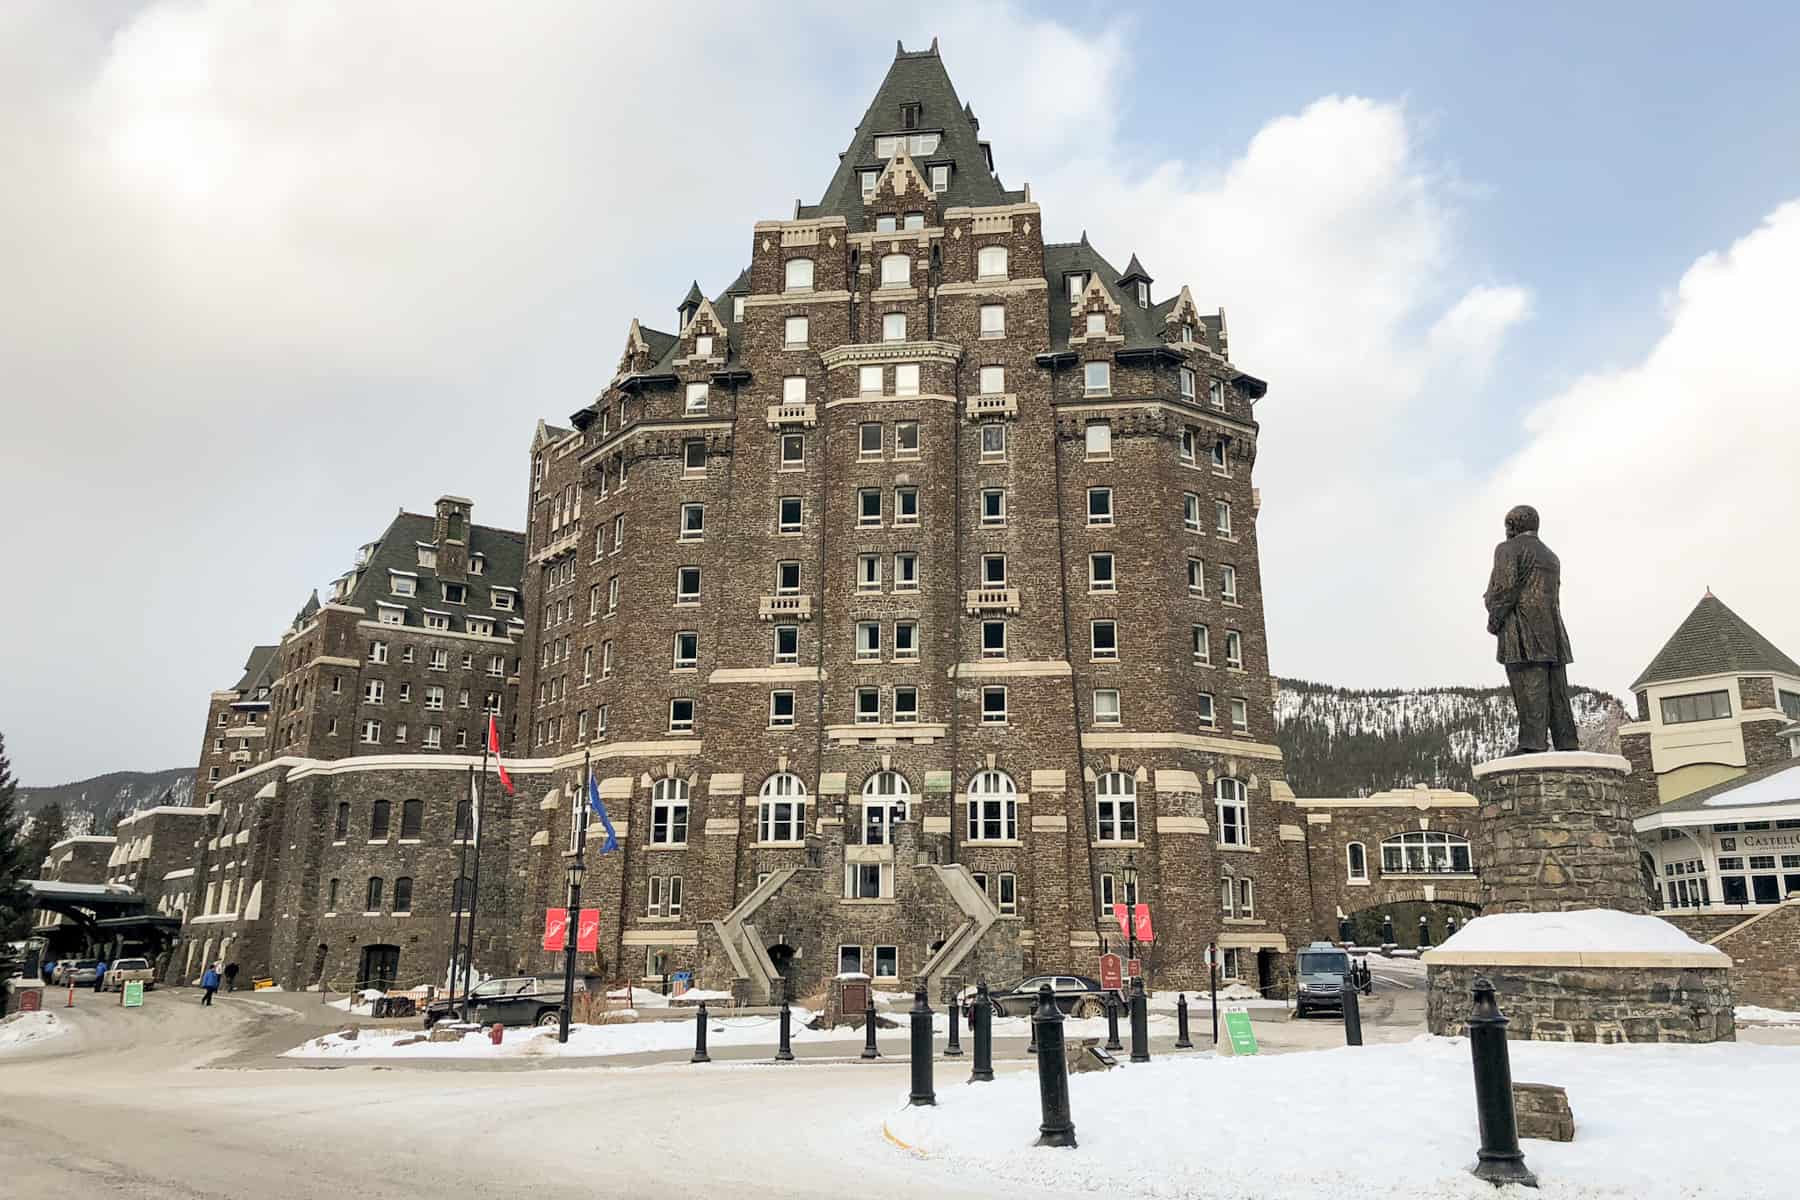 A large brown building with triangular top windows - the exterior of Fairmont Banff Springs Hotel in winter.